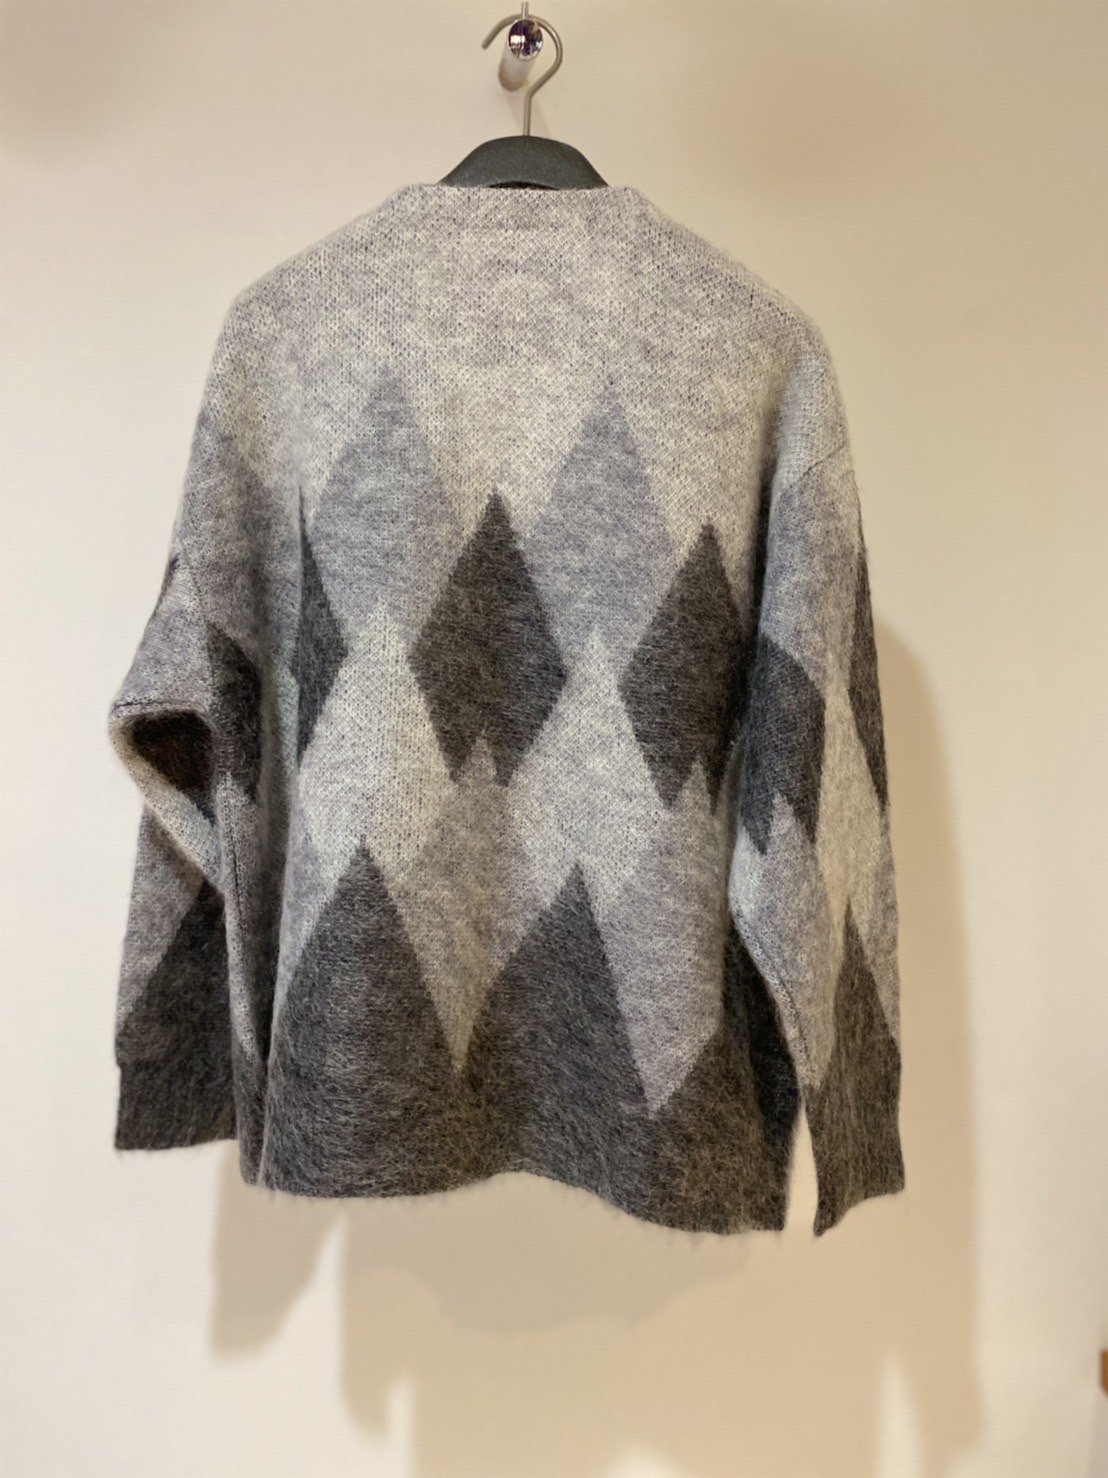 DAIRIKU<br />Argyle Mohair Cardigan / Fether Grey<img class='new_mark_img2' src='https://img.shop-pro.jp/img/new/icons14.gif' style='border:none;display:inline;margin:0px;padding:0px;width:auto;' />